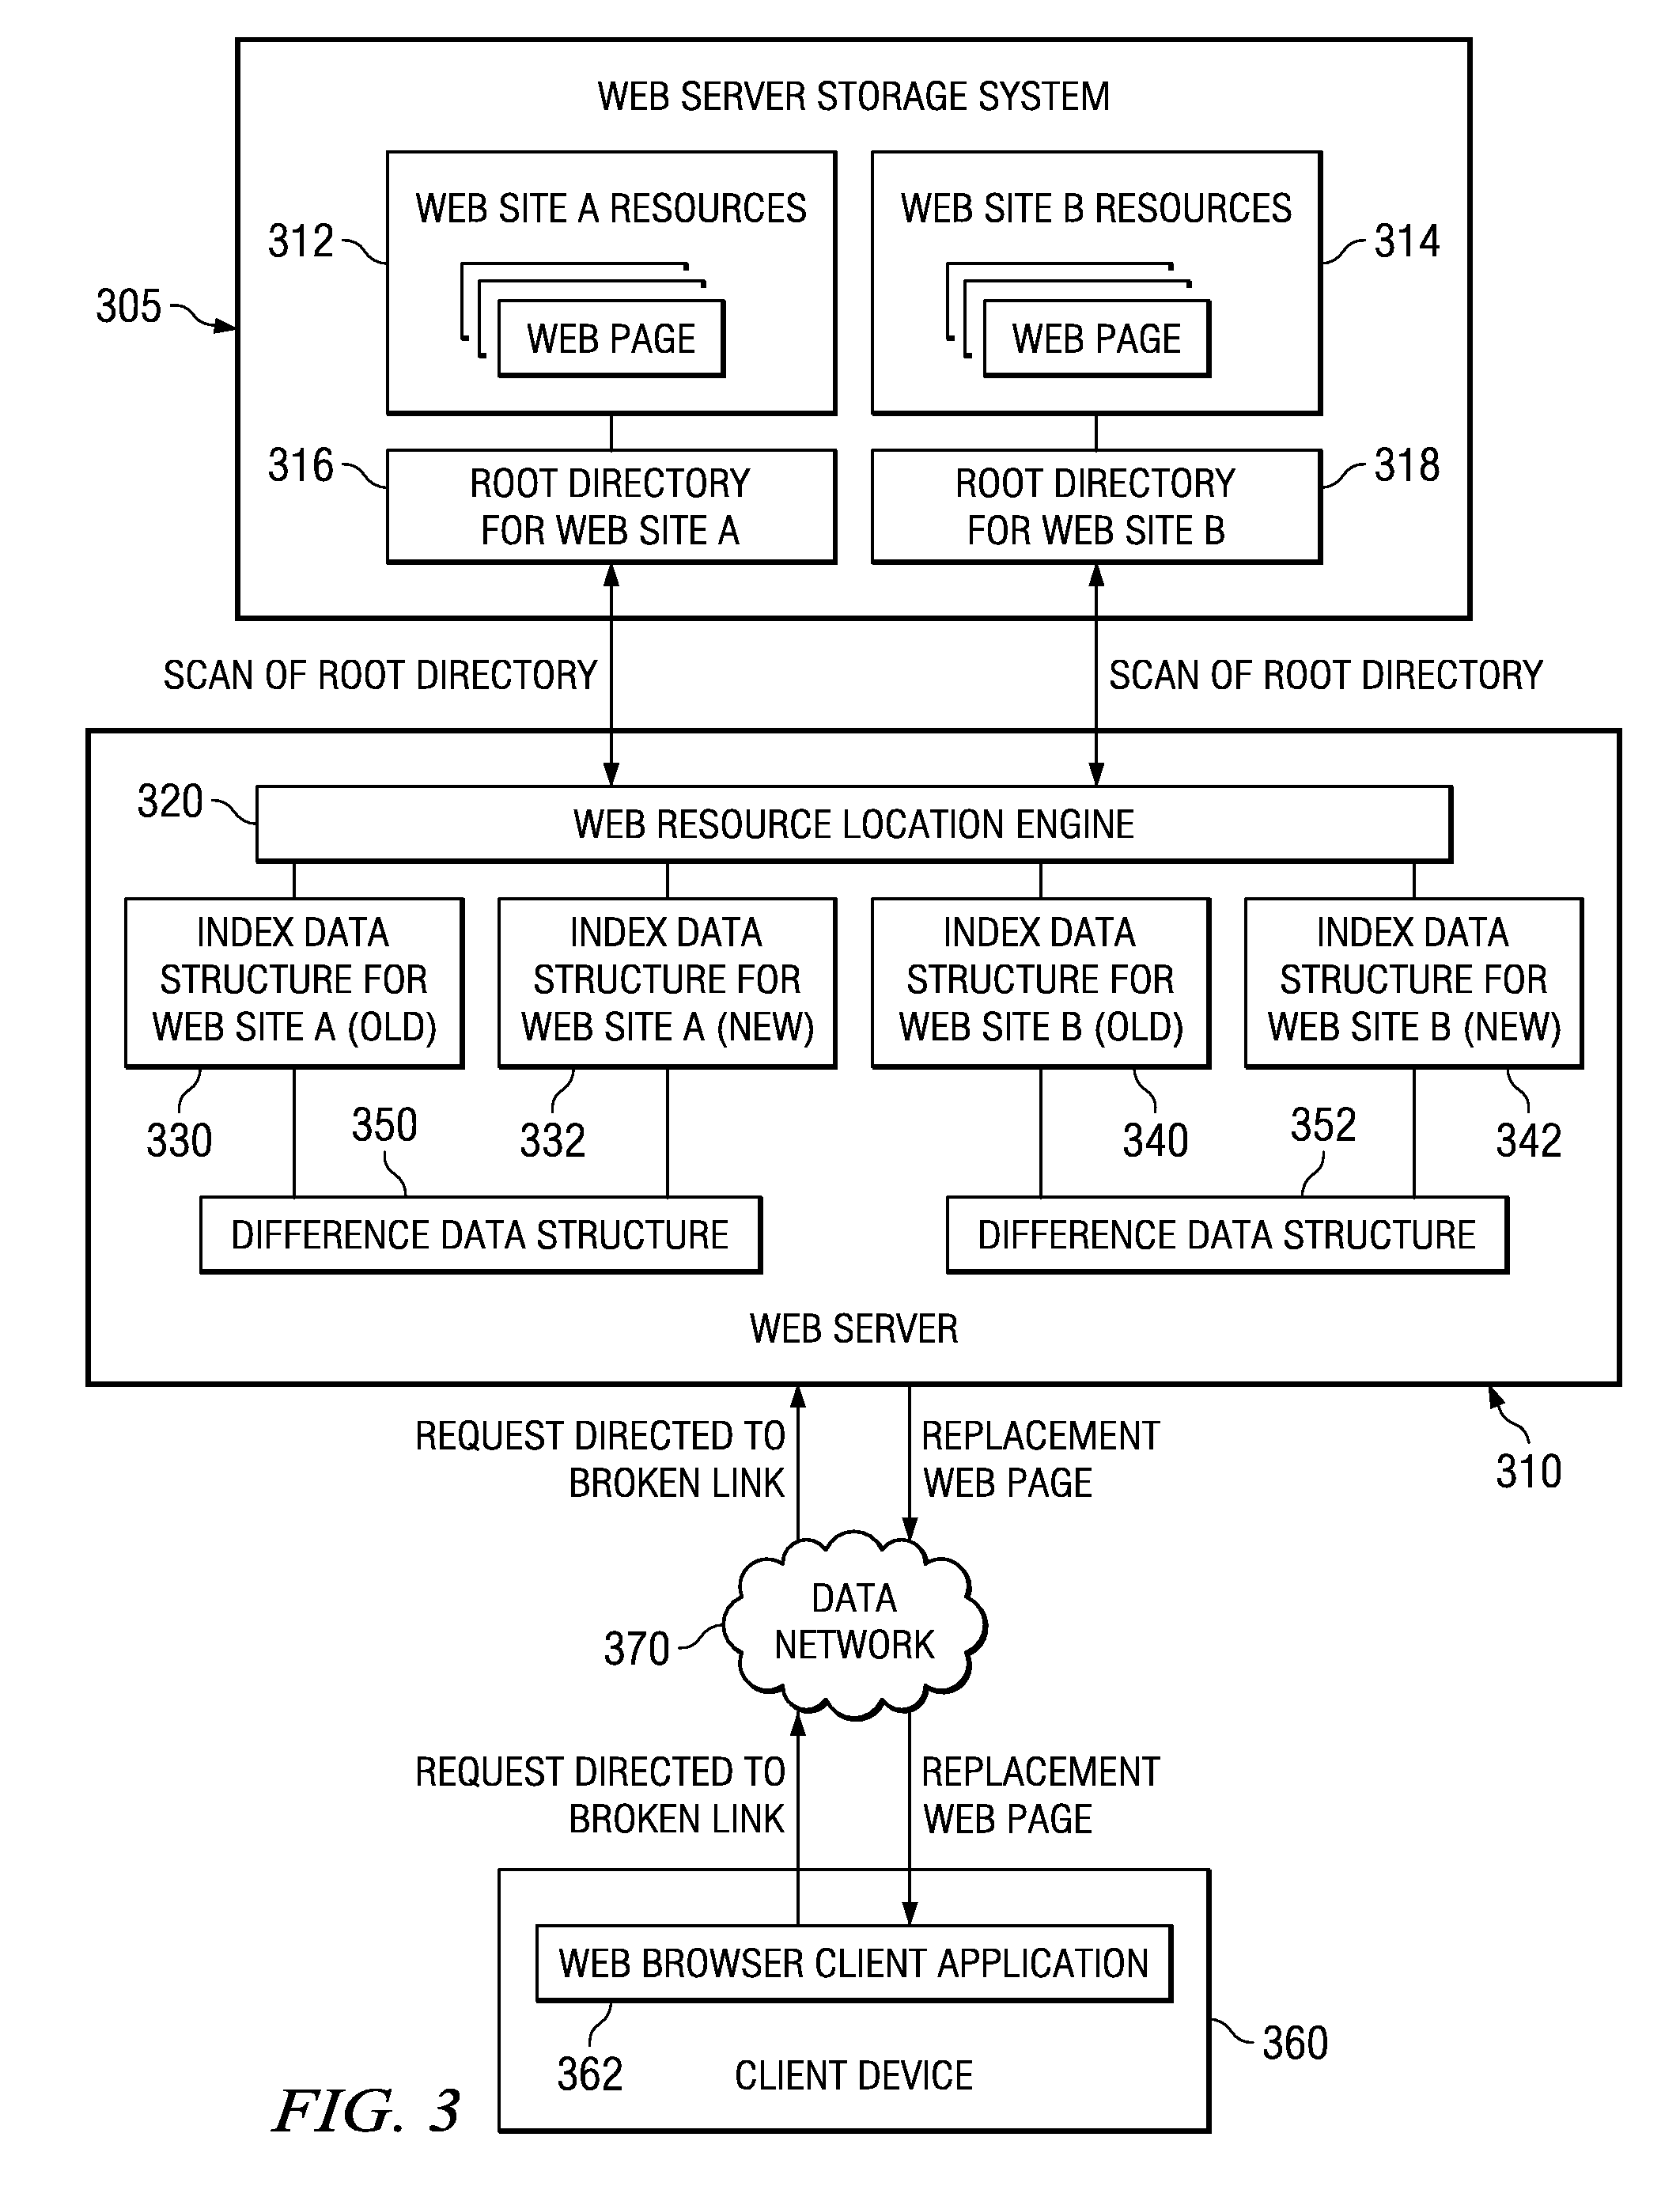 System and Method for Automatically Providing a Web Resource for a Broken Web Link